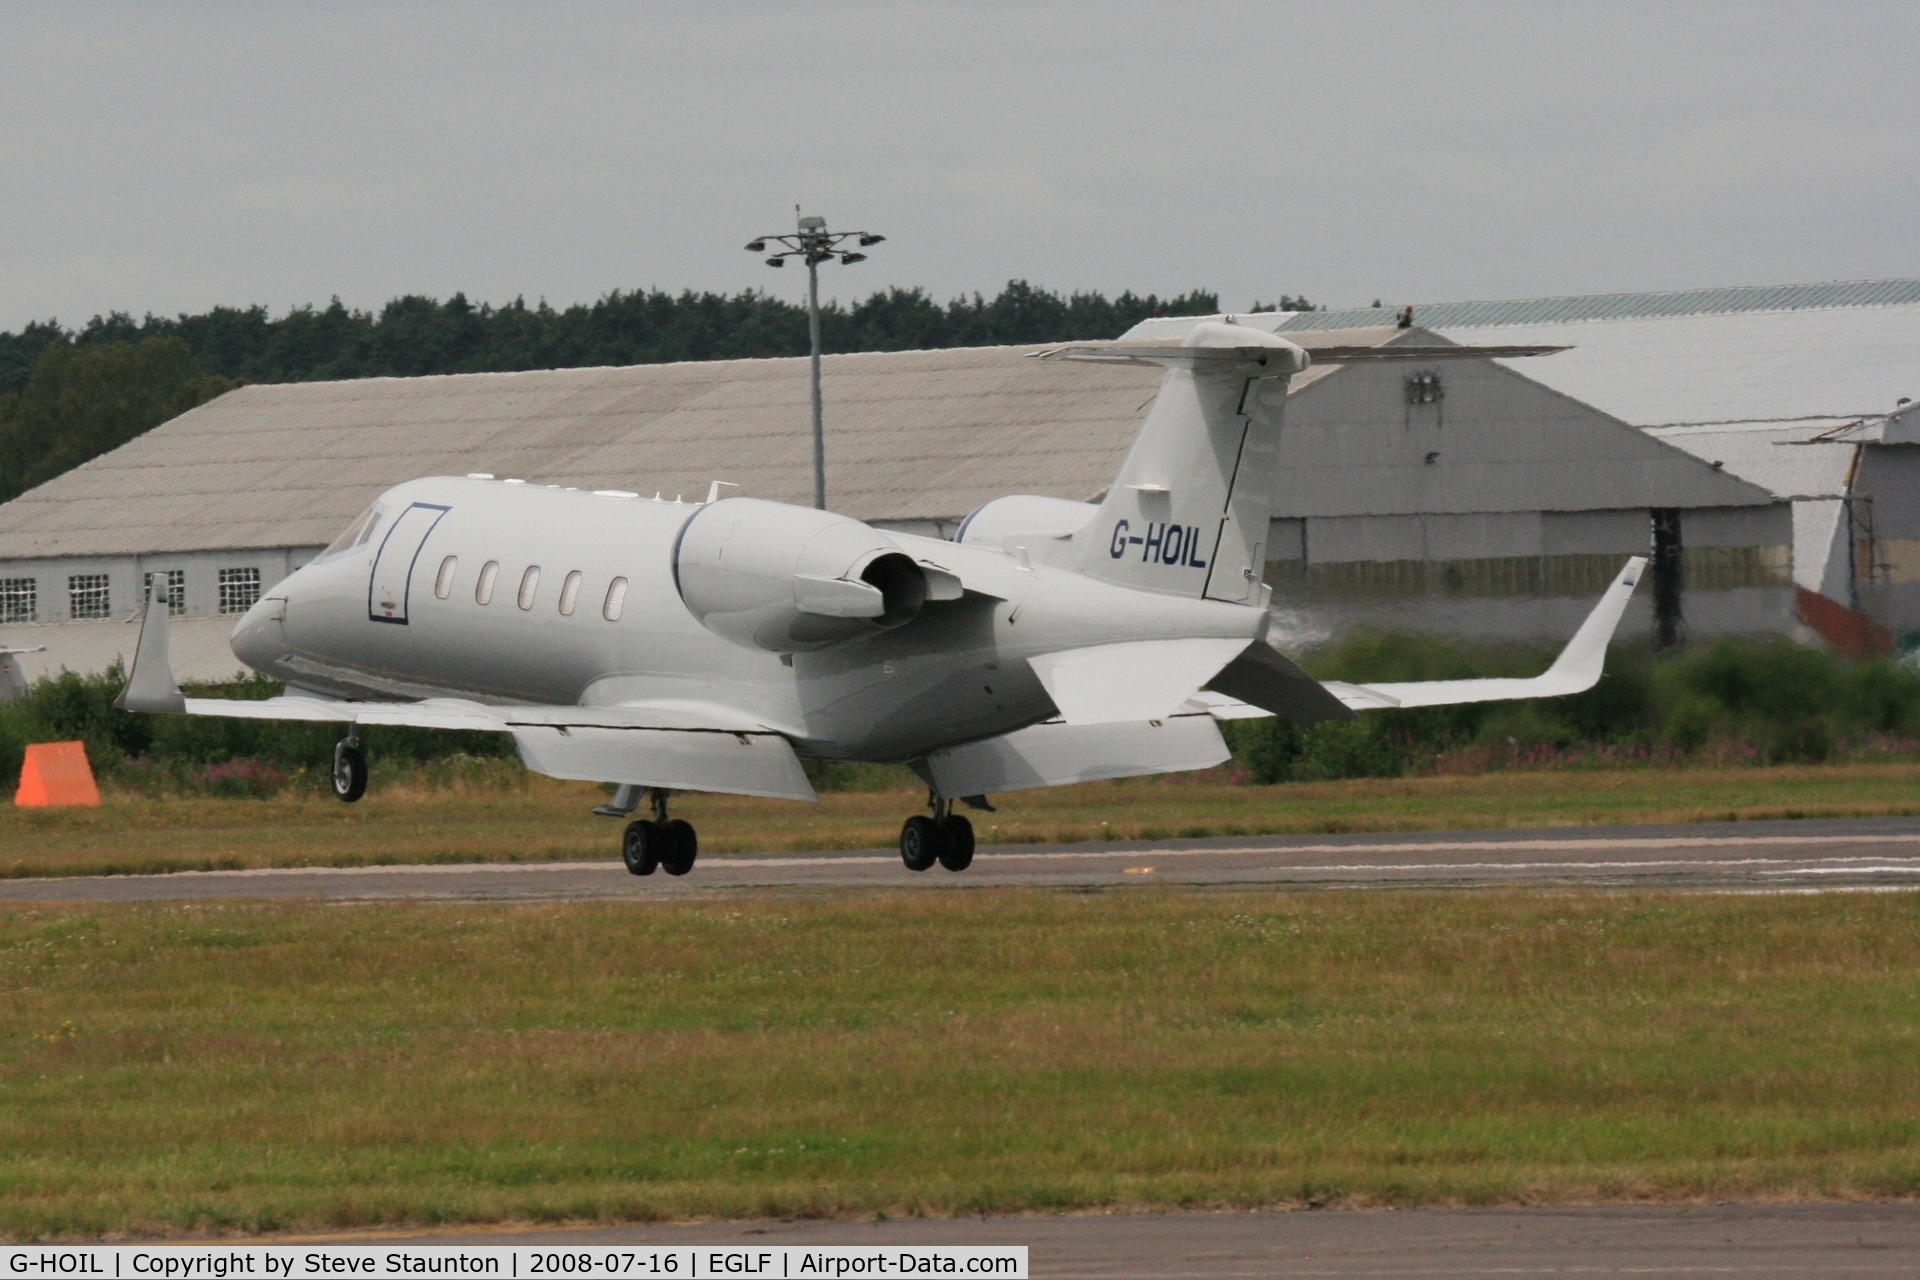 G-HOIL, 2007 Learjet 60 C/N 60-313, Taken at Farnborough Airshow on the Wednesday trade day, 16th July 2009